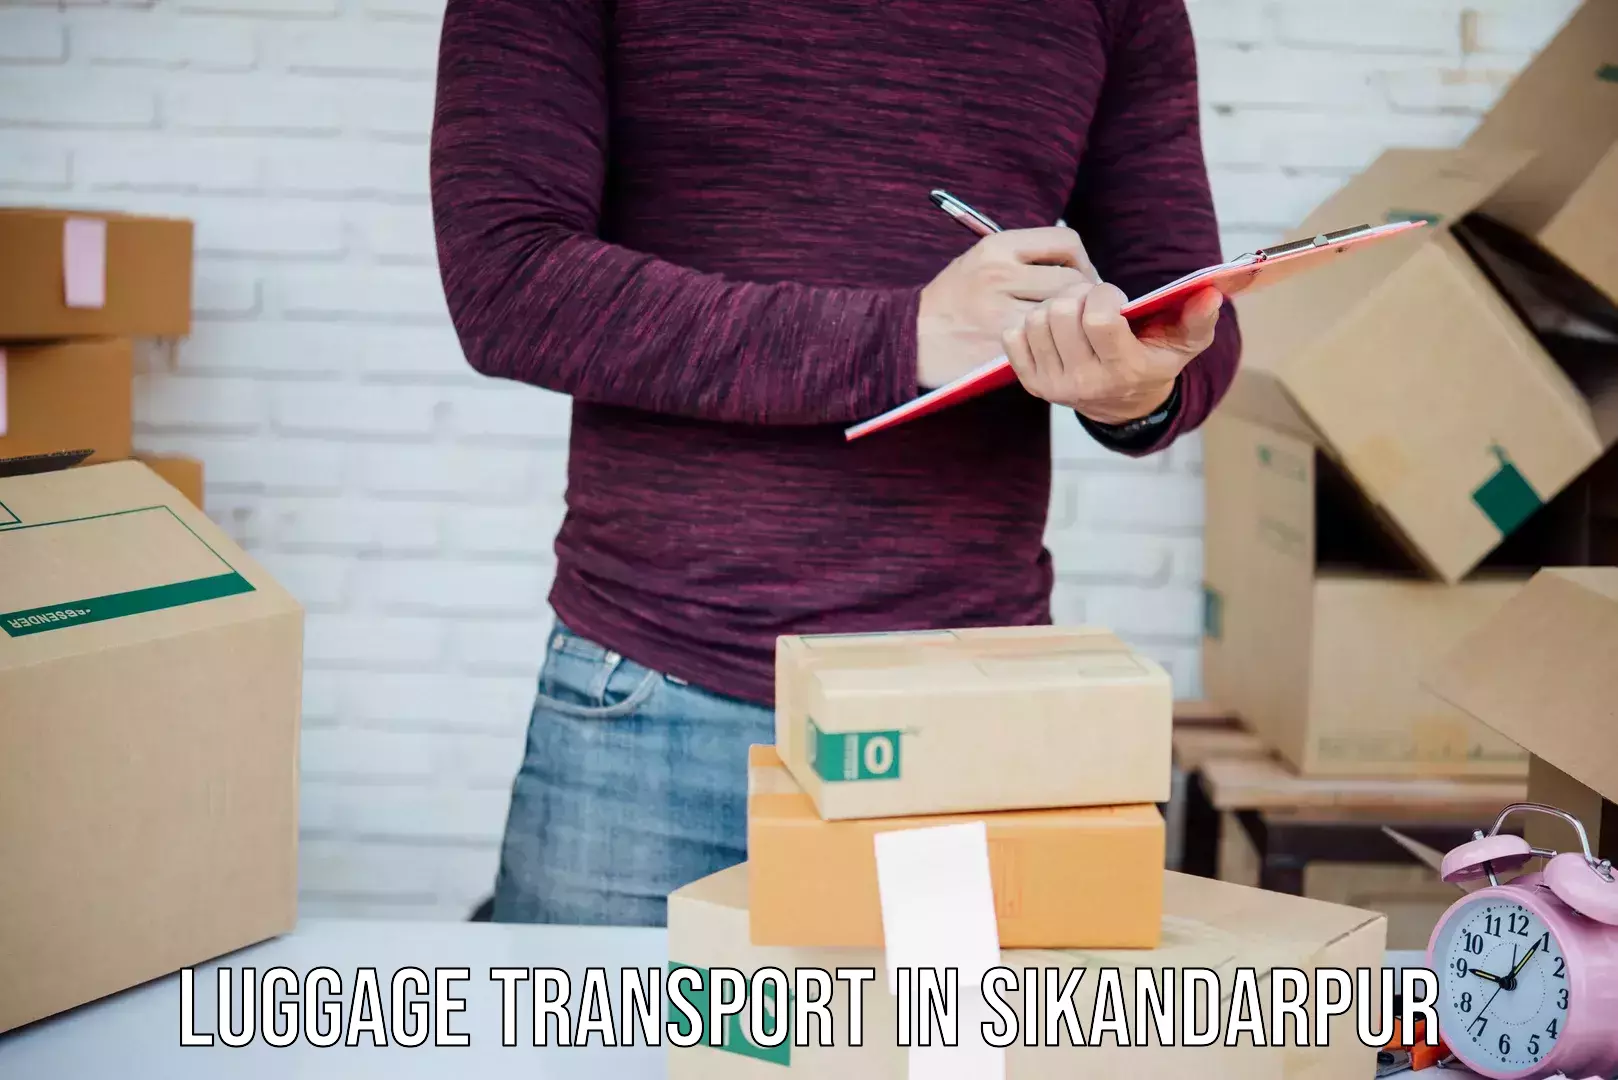 Luggage transport operations in Sikandarpur